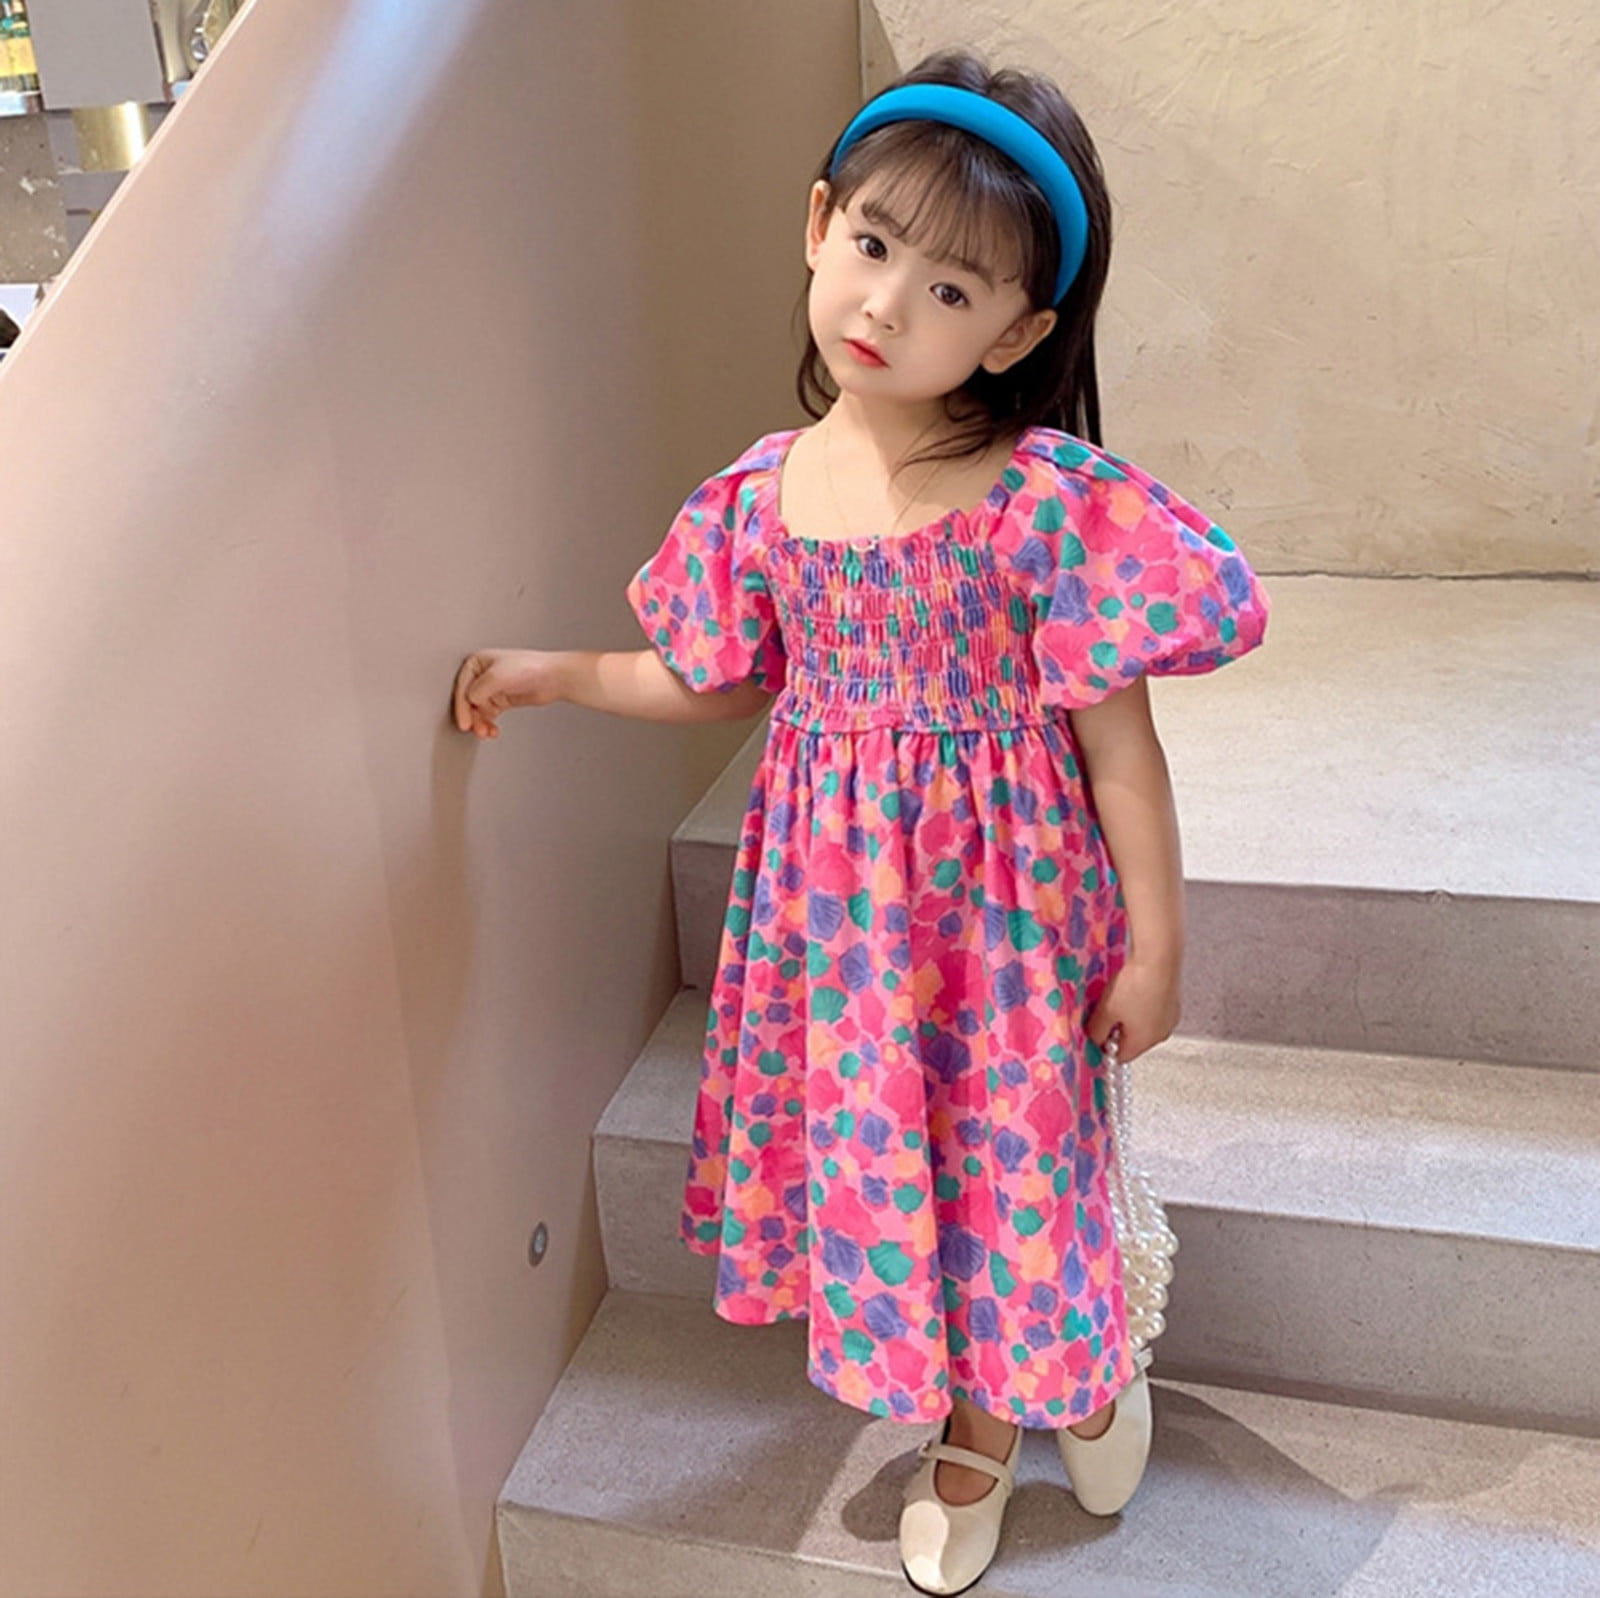 TAIAOJING Baby Girl Summer Dress Toddler Kids Puff Sleeve Floral Pattern  Backless Princess Outfits Dresses 1-2 Years 